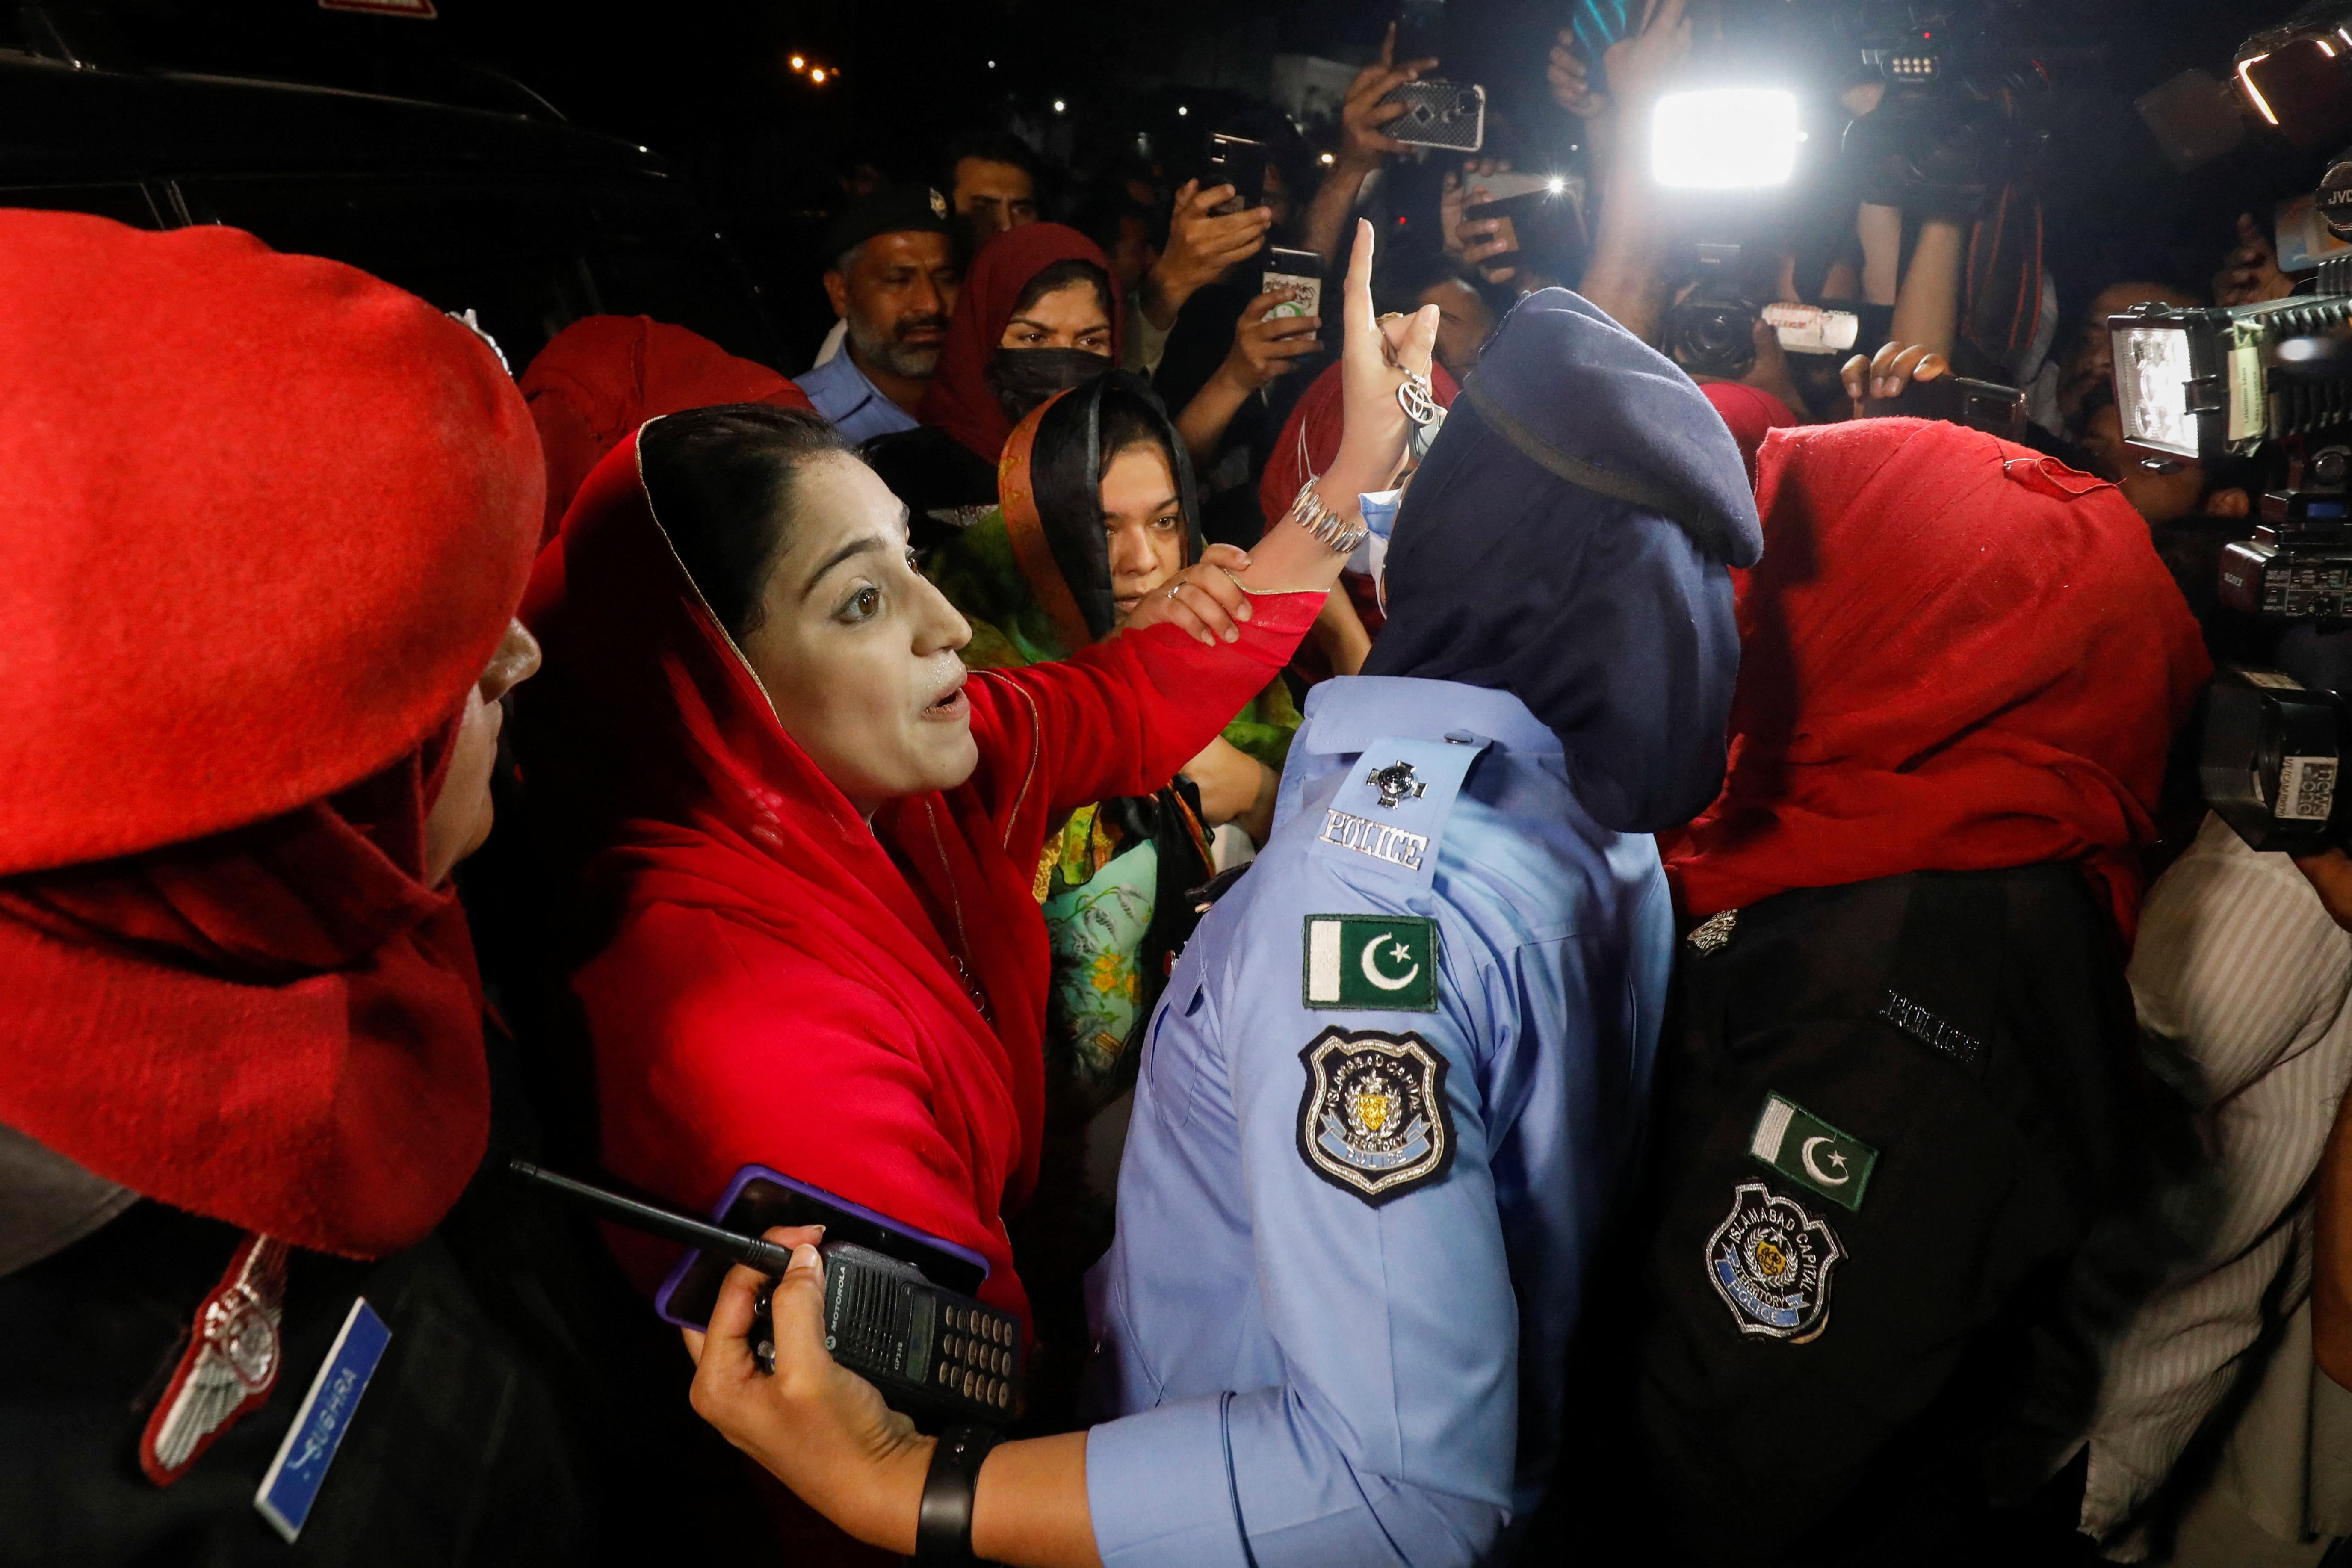 Police officers detain supporters of former Pakistani PM Khan during a protest in Islamabad